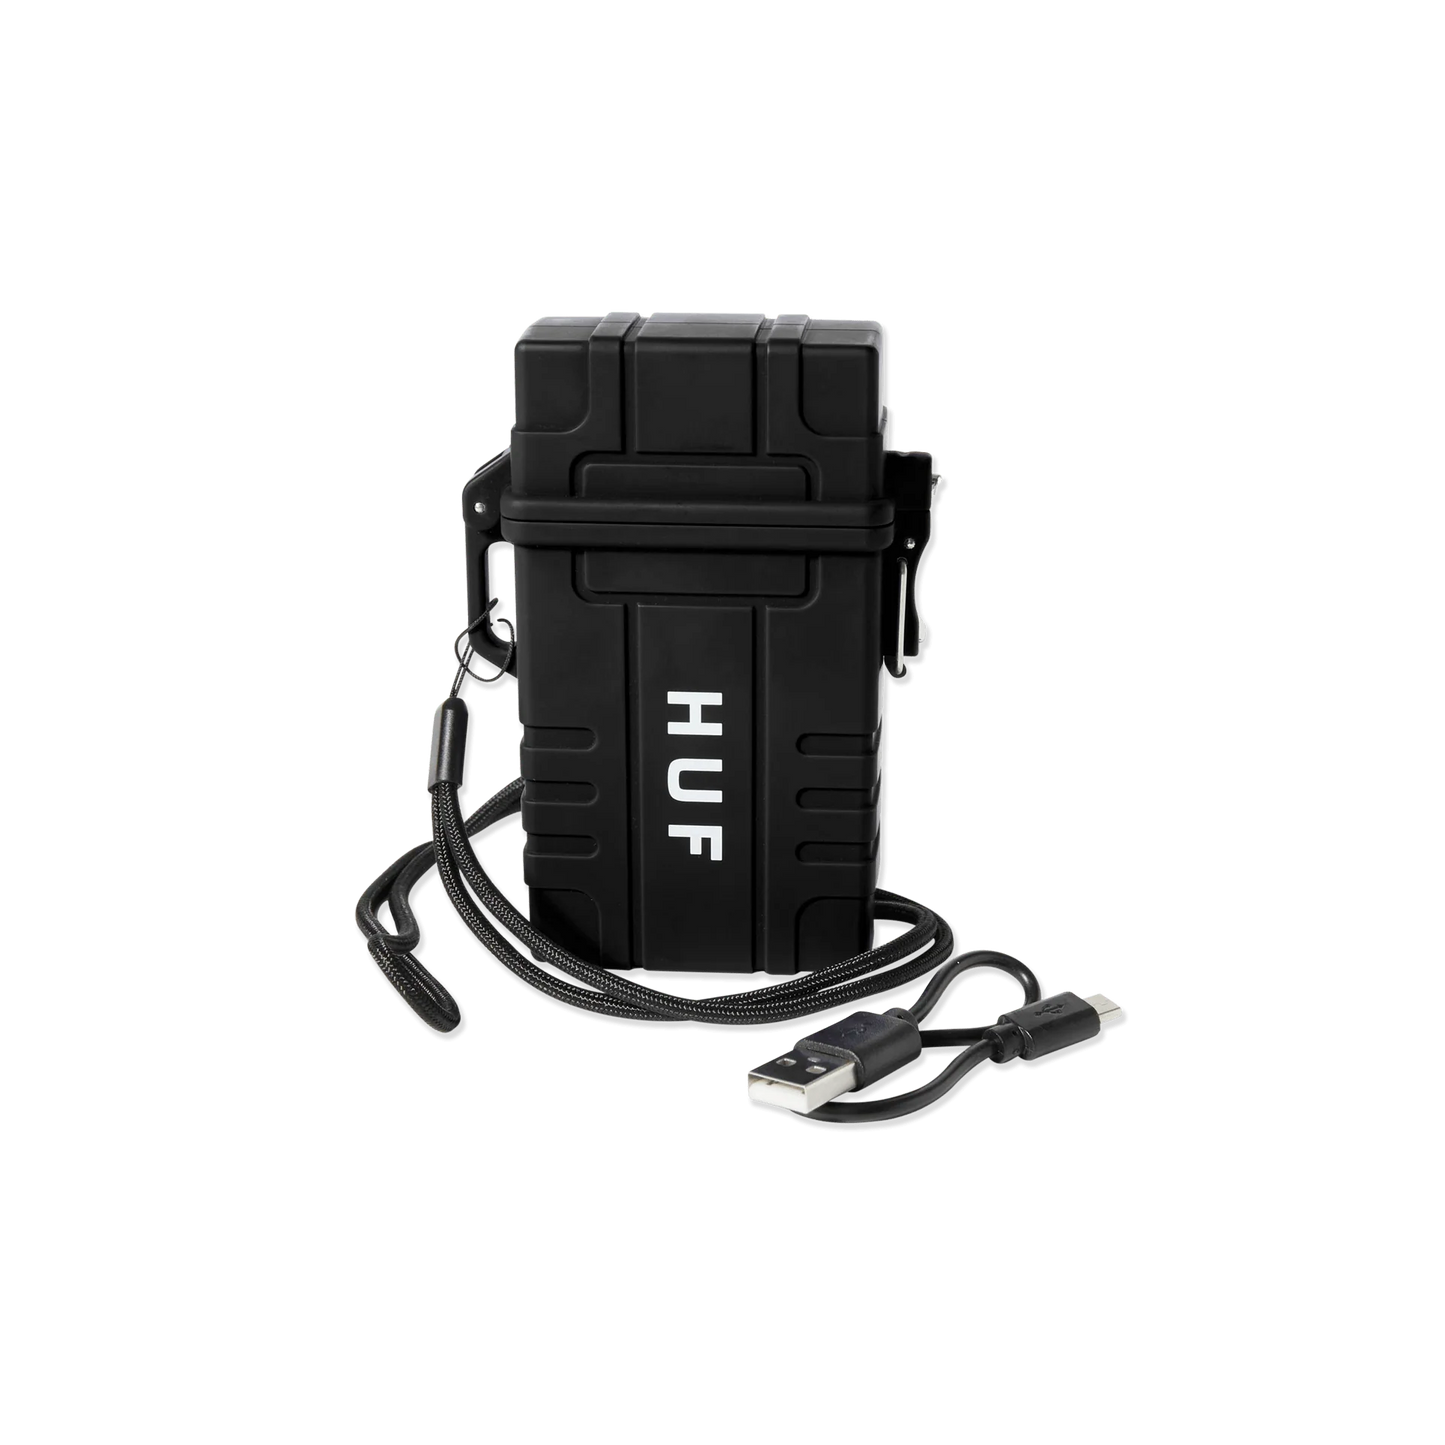 Huf Expedition Waterproof Case black